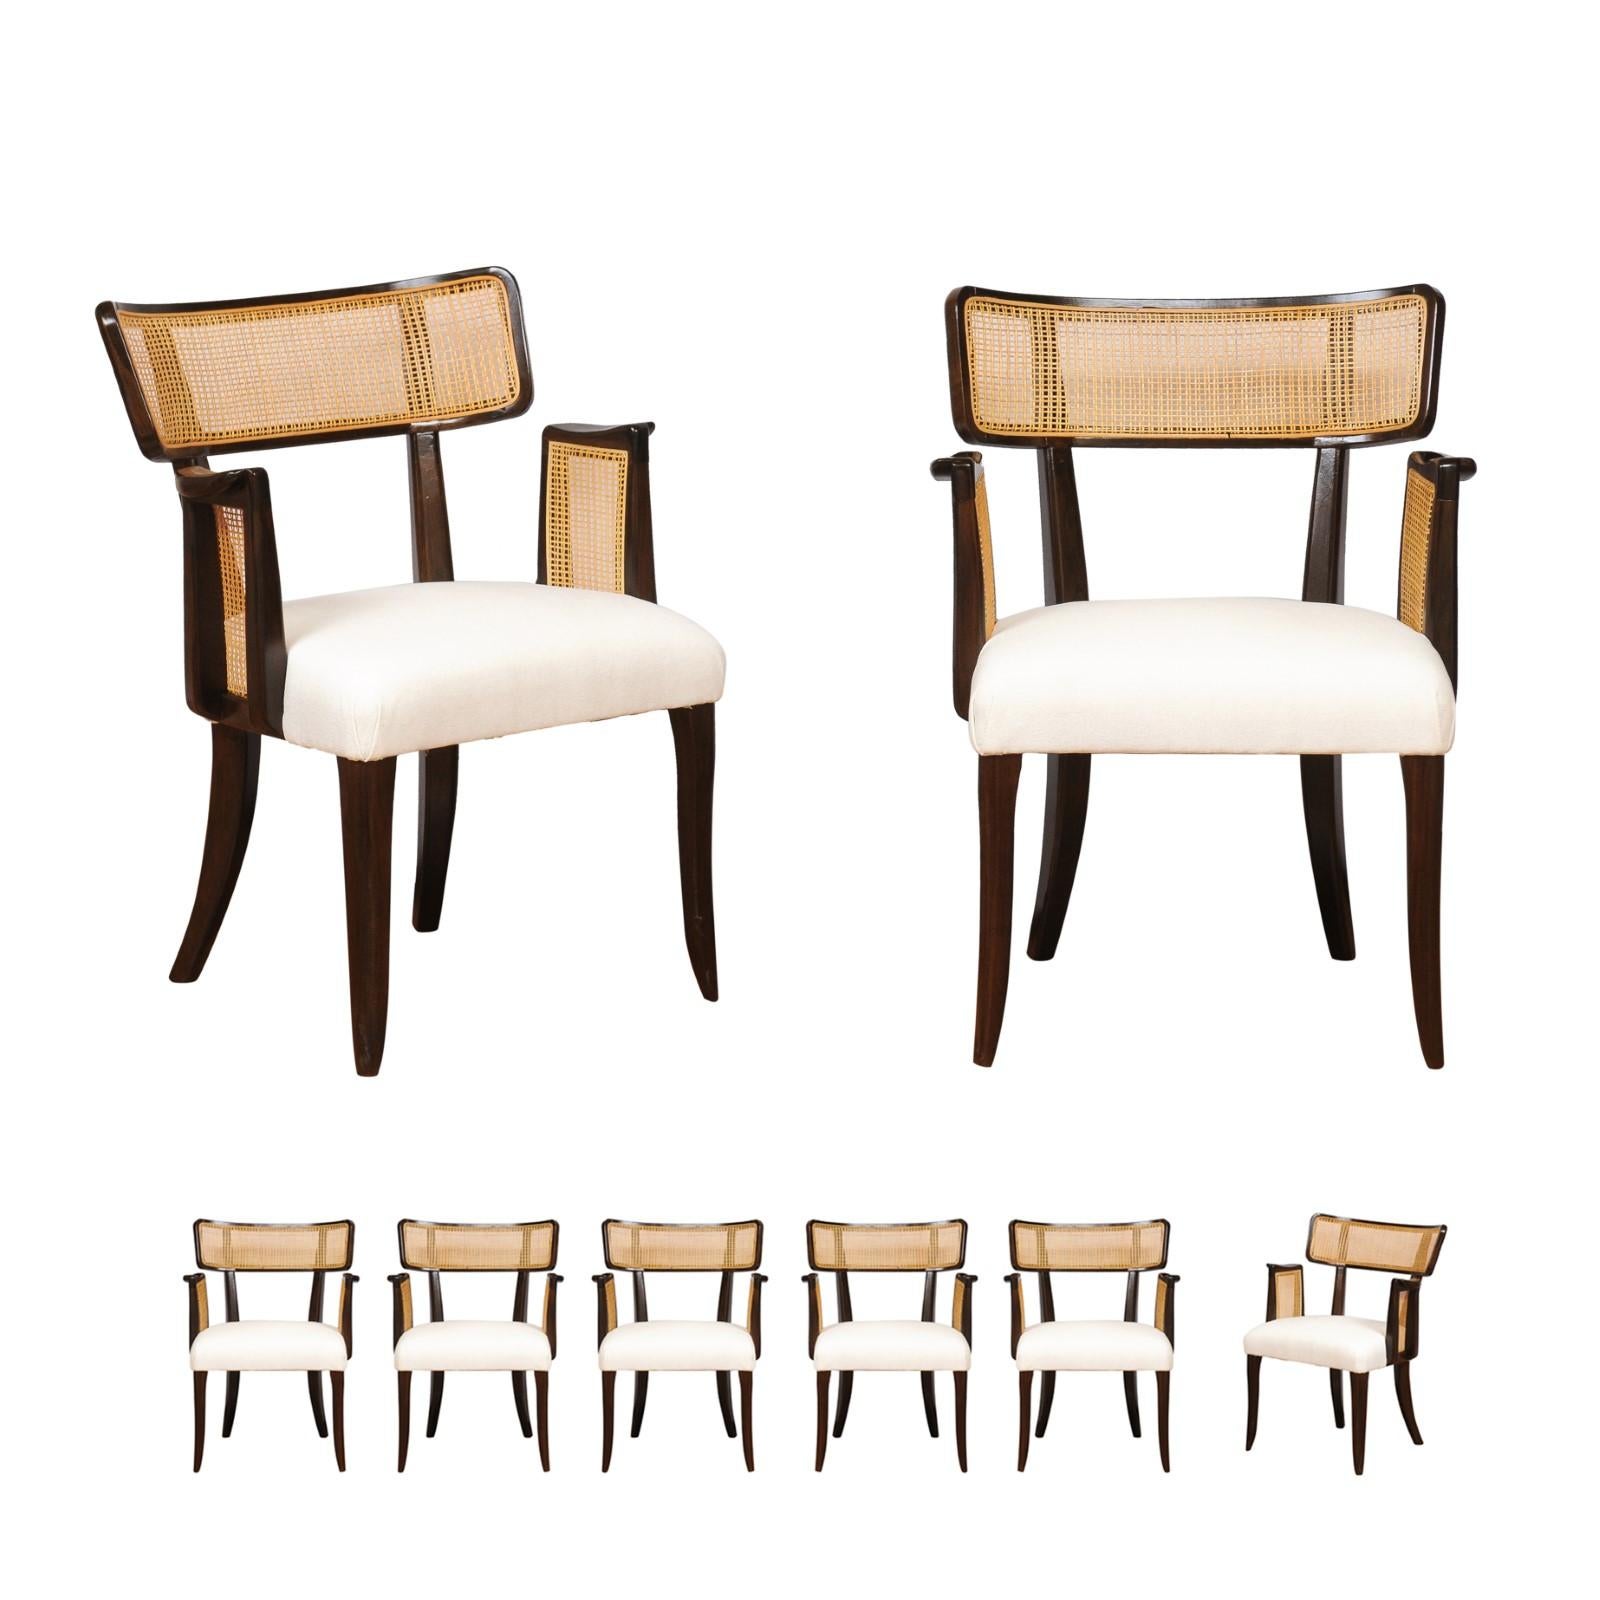 These magnificent dining chairs are shipped as professionally photographed and described in the listing narrative, completely installation ready. This large All Arm set of difficult to find examples is unique on the world market. Expert custom